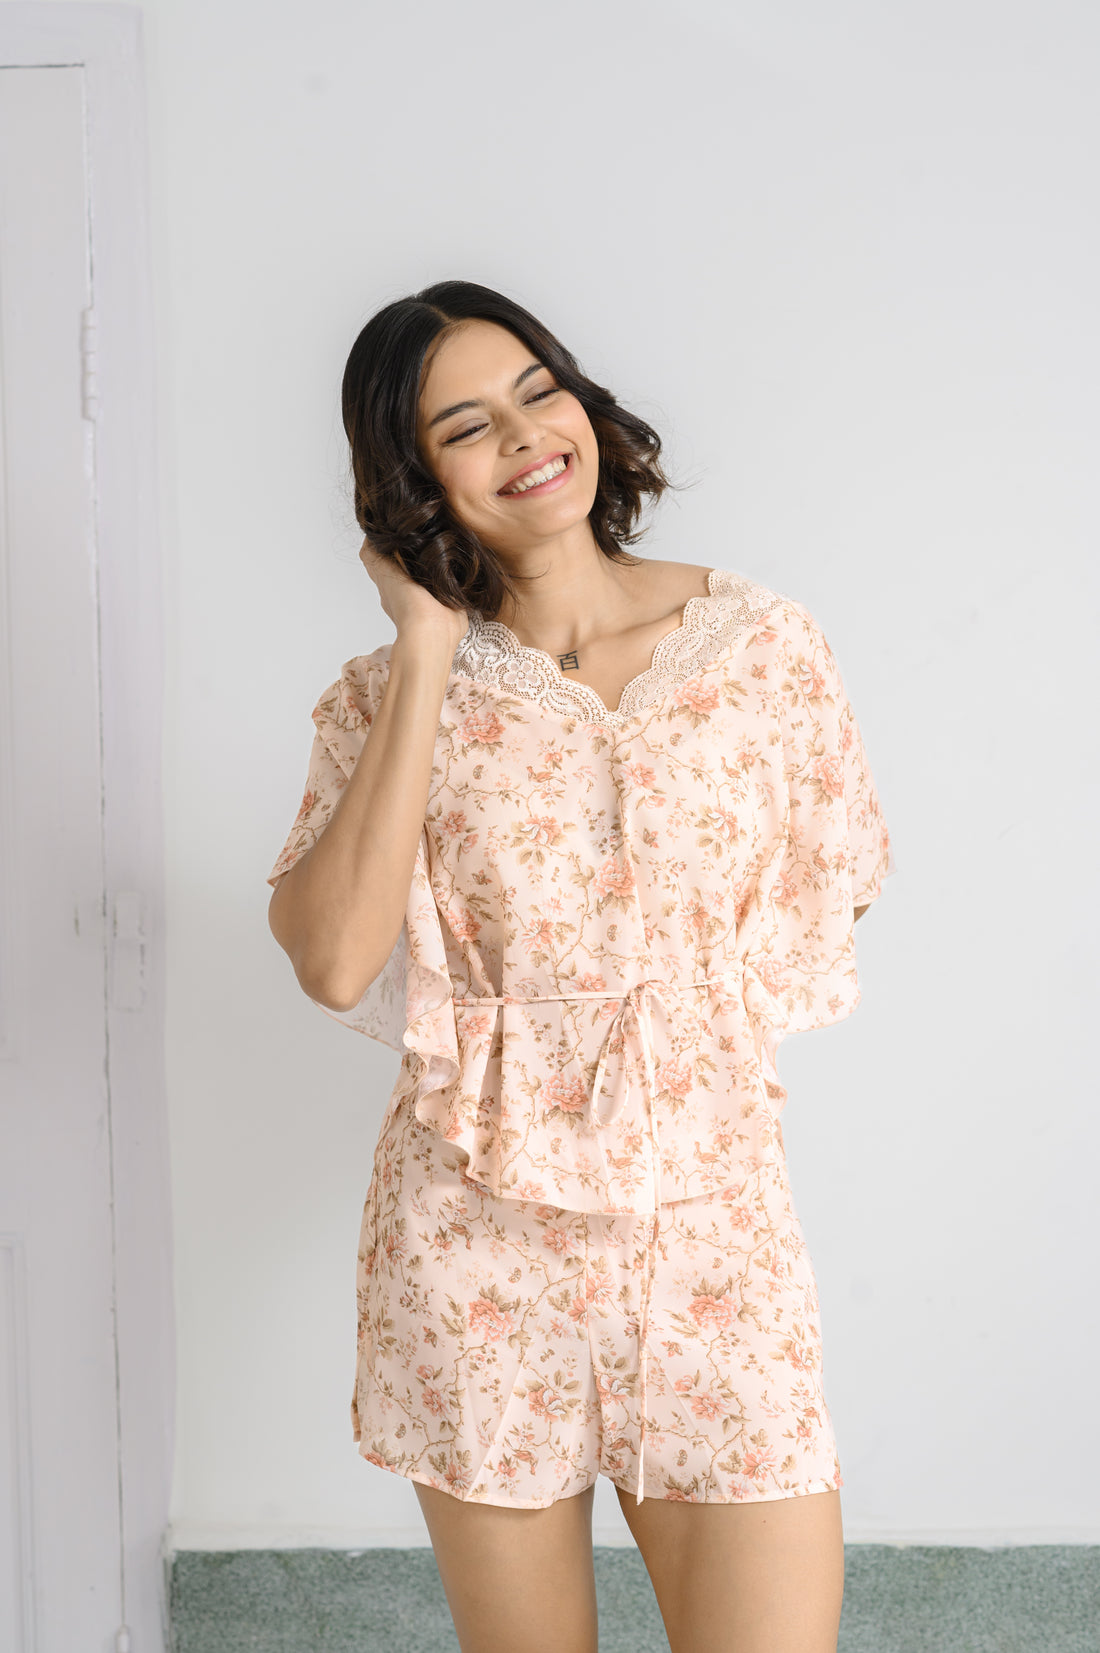 Floral Bliss: Delicate Floral Kaftan Top with Comfortable Shorts